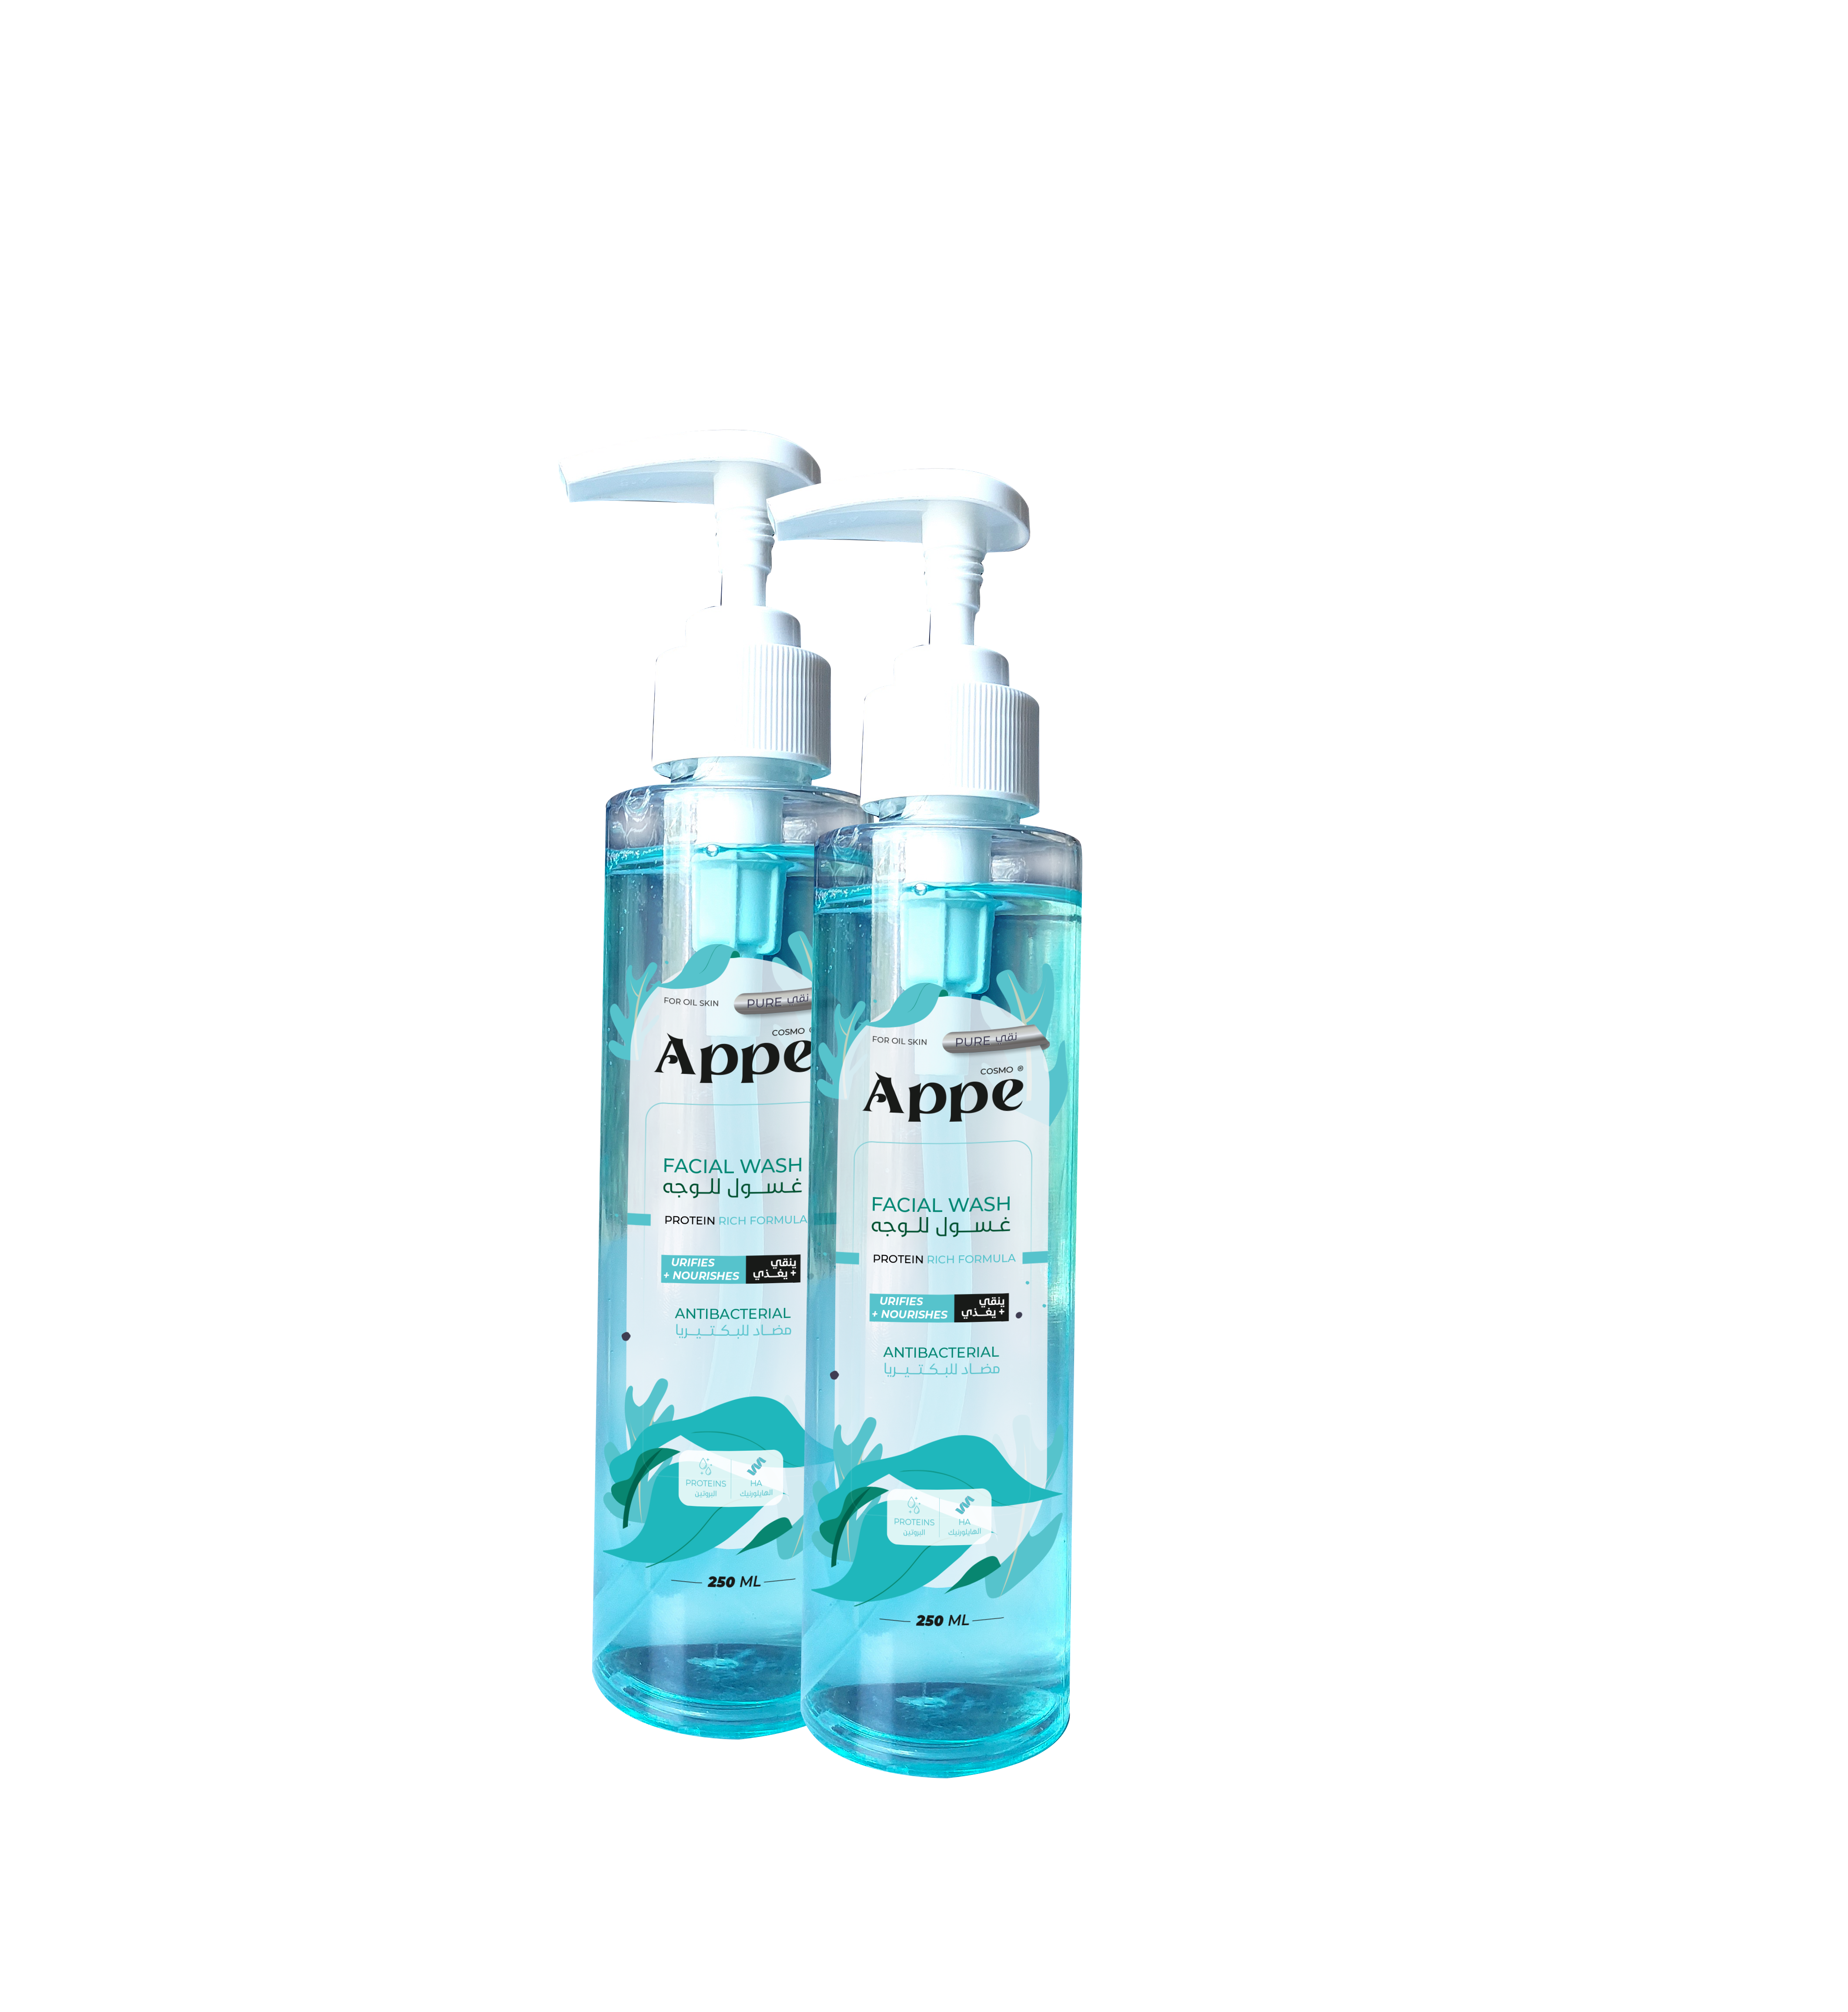 Oily cleansing gel 2 pieces